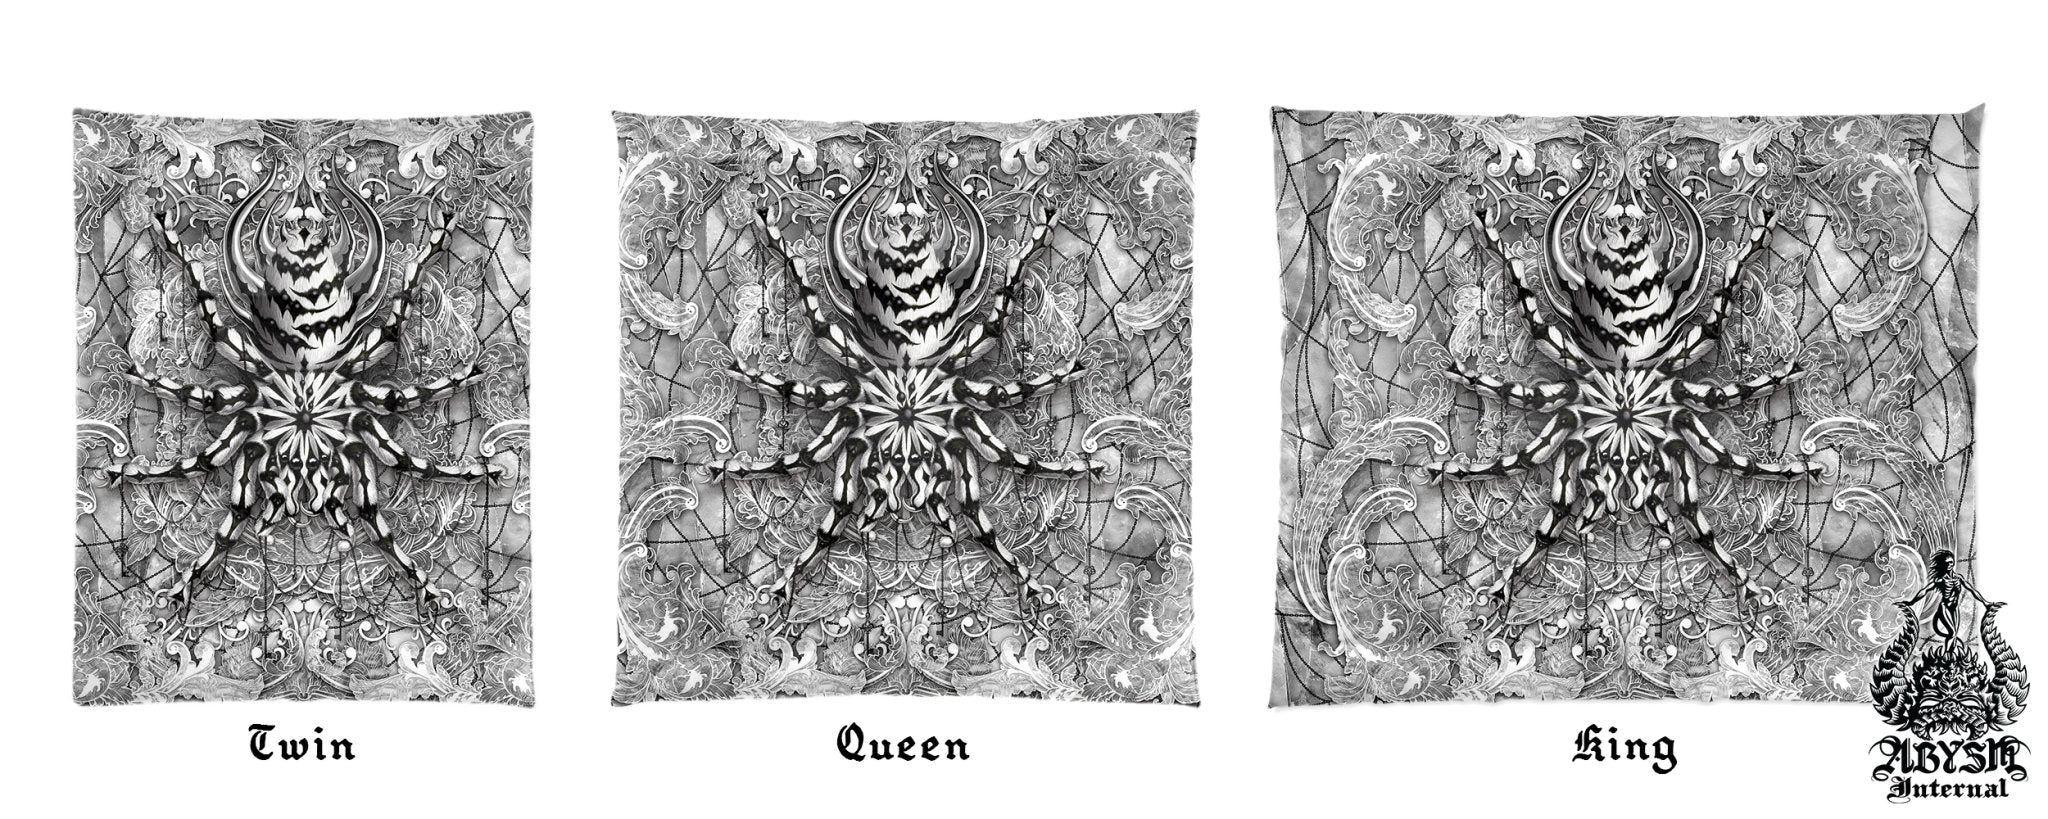 White Goth Bedding Set, Comforter and Duvet, Bed Cover and Bedroom Decor, King, Queen and Twin Size - Tarantula Spider, Stone - Abysm Internal